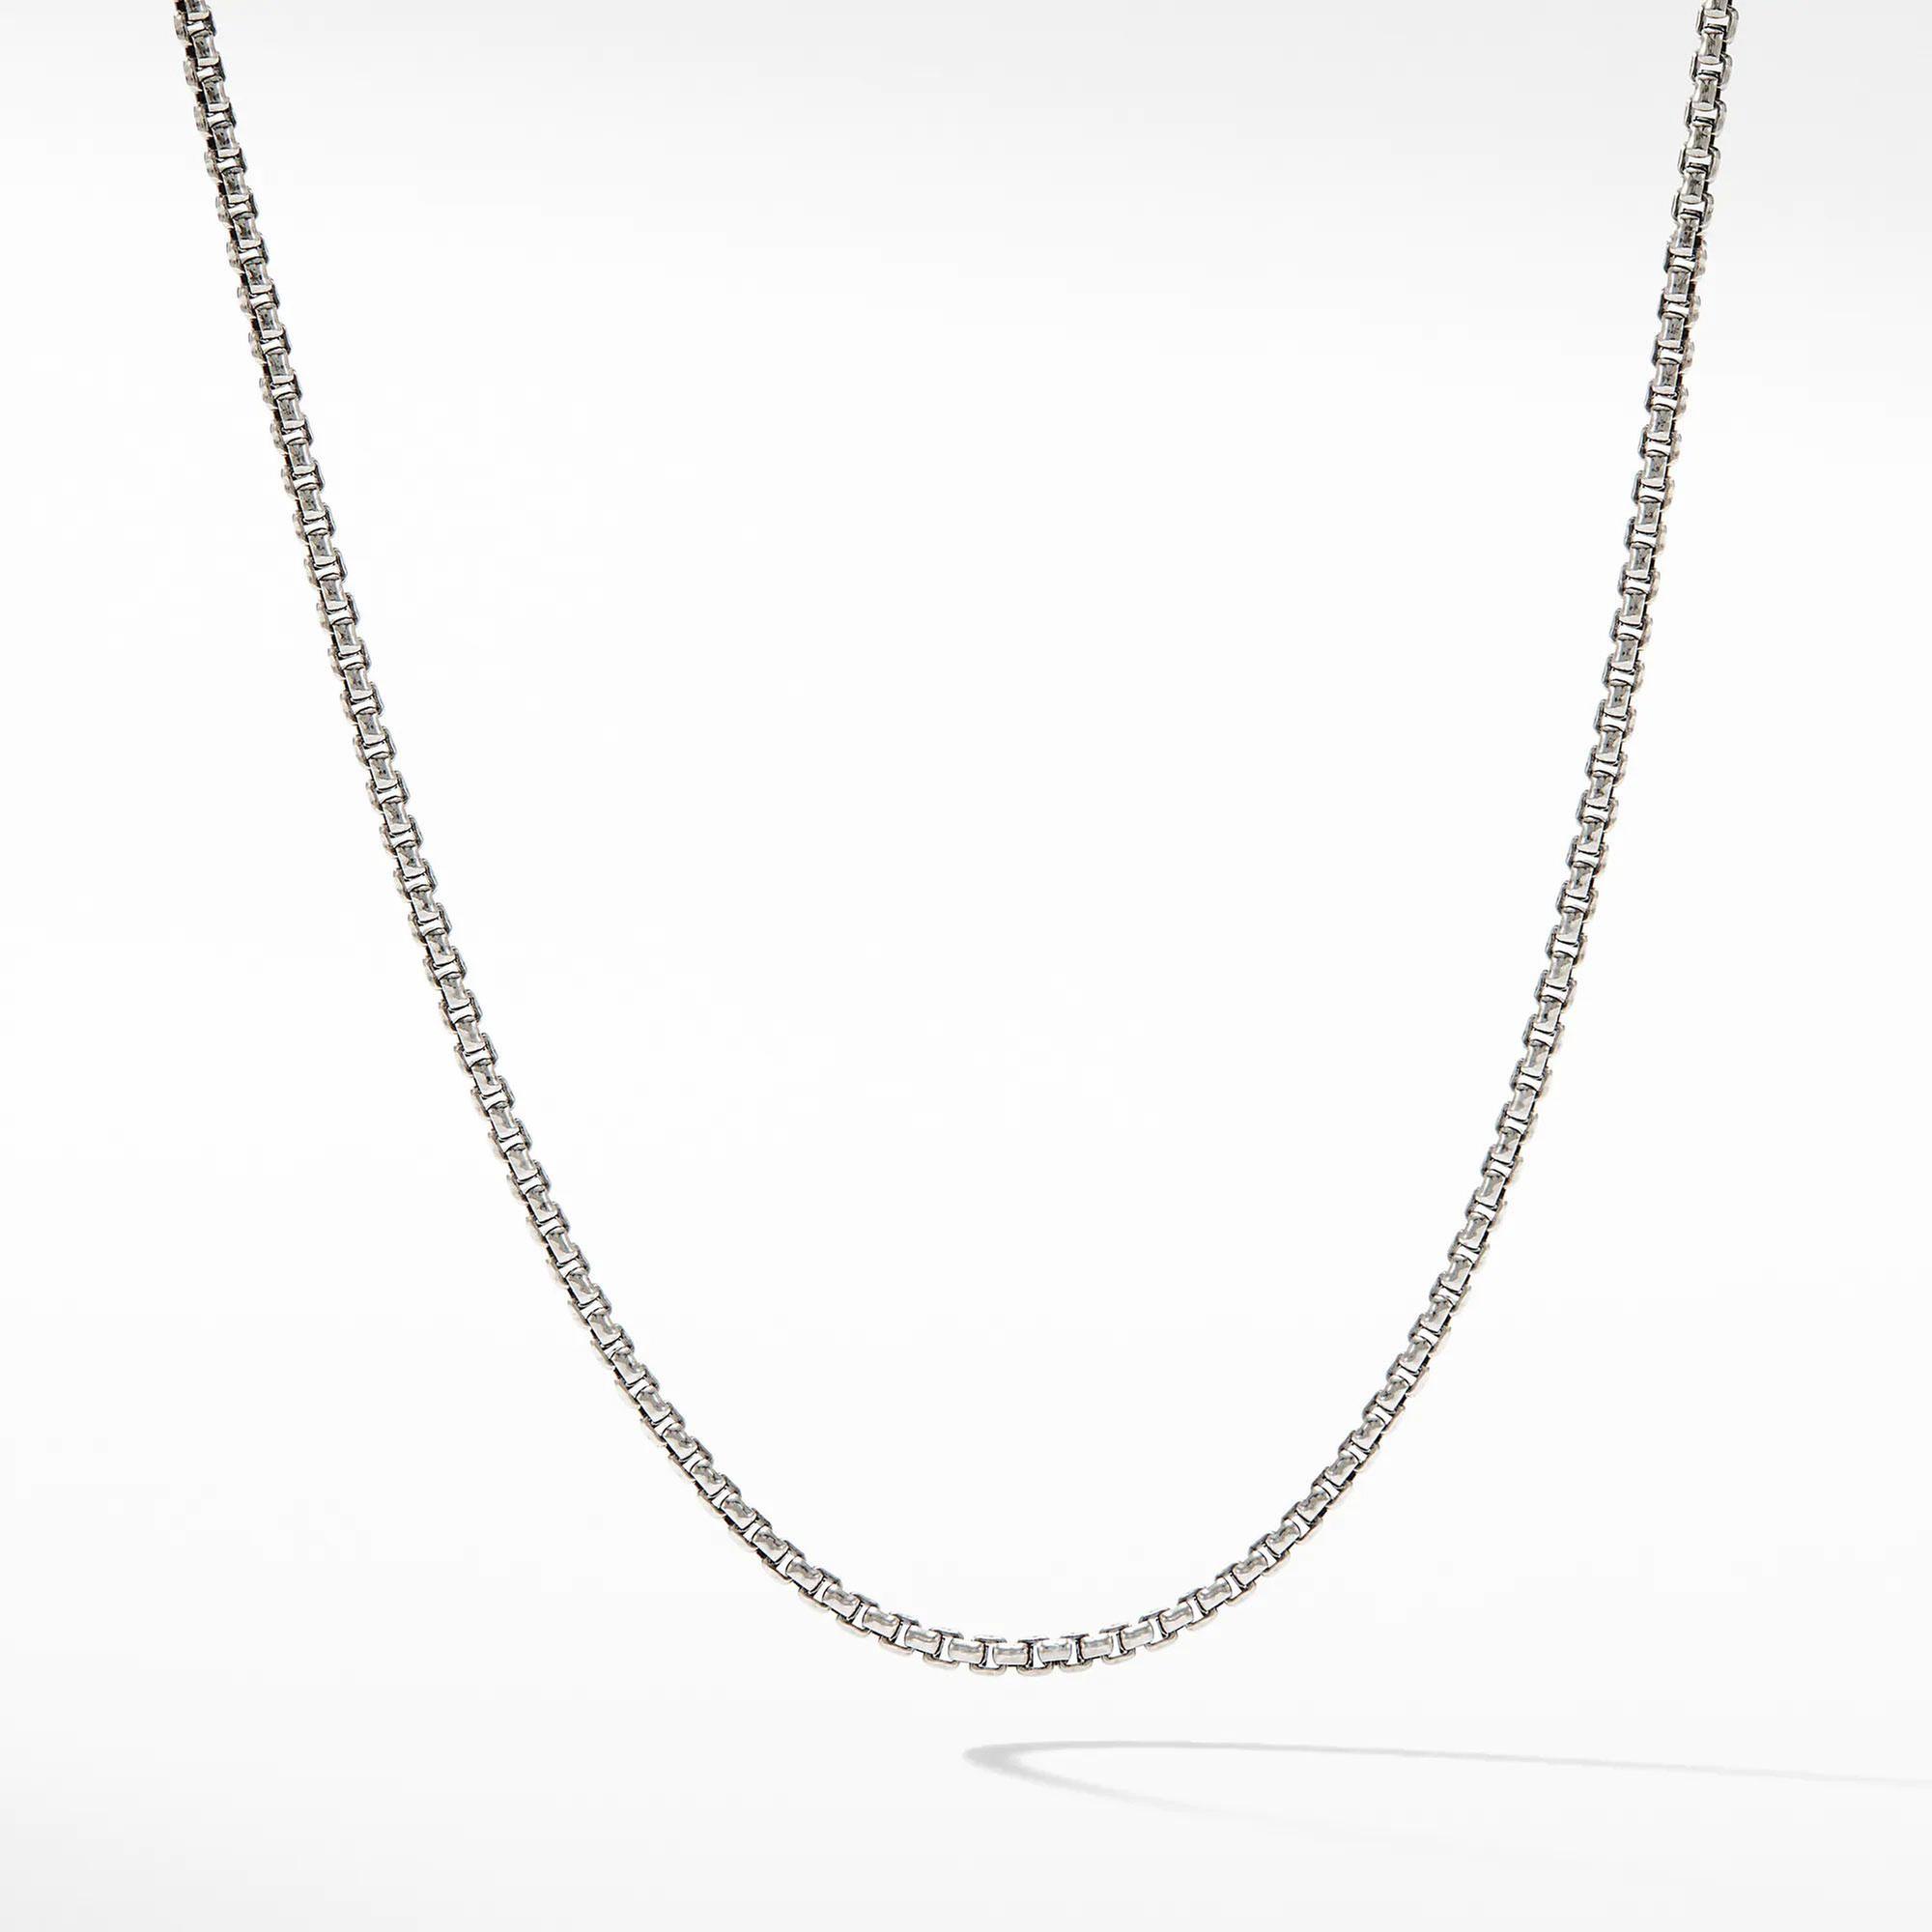 David Yurman Baby Box Chain Necklace with An Accent of 14k Gold, 1.7mm - 18 Inches -  CH0126 S418